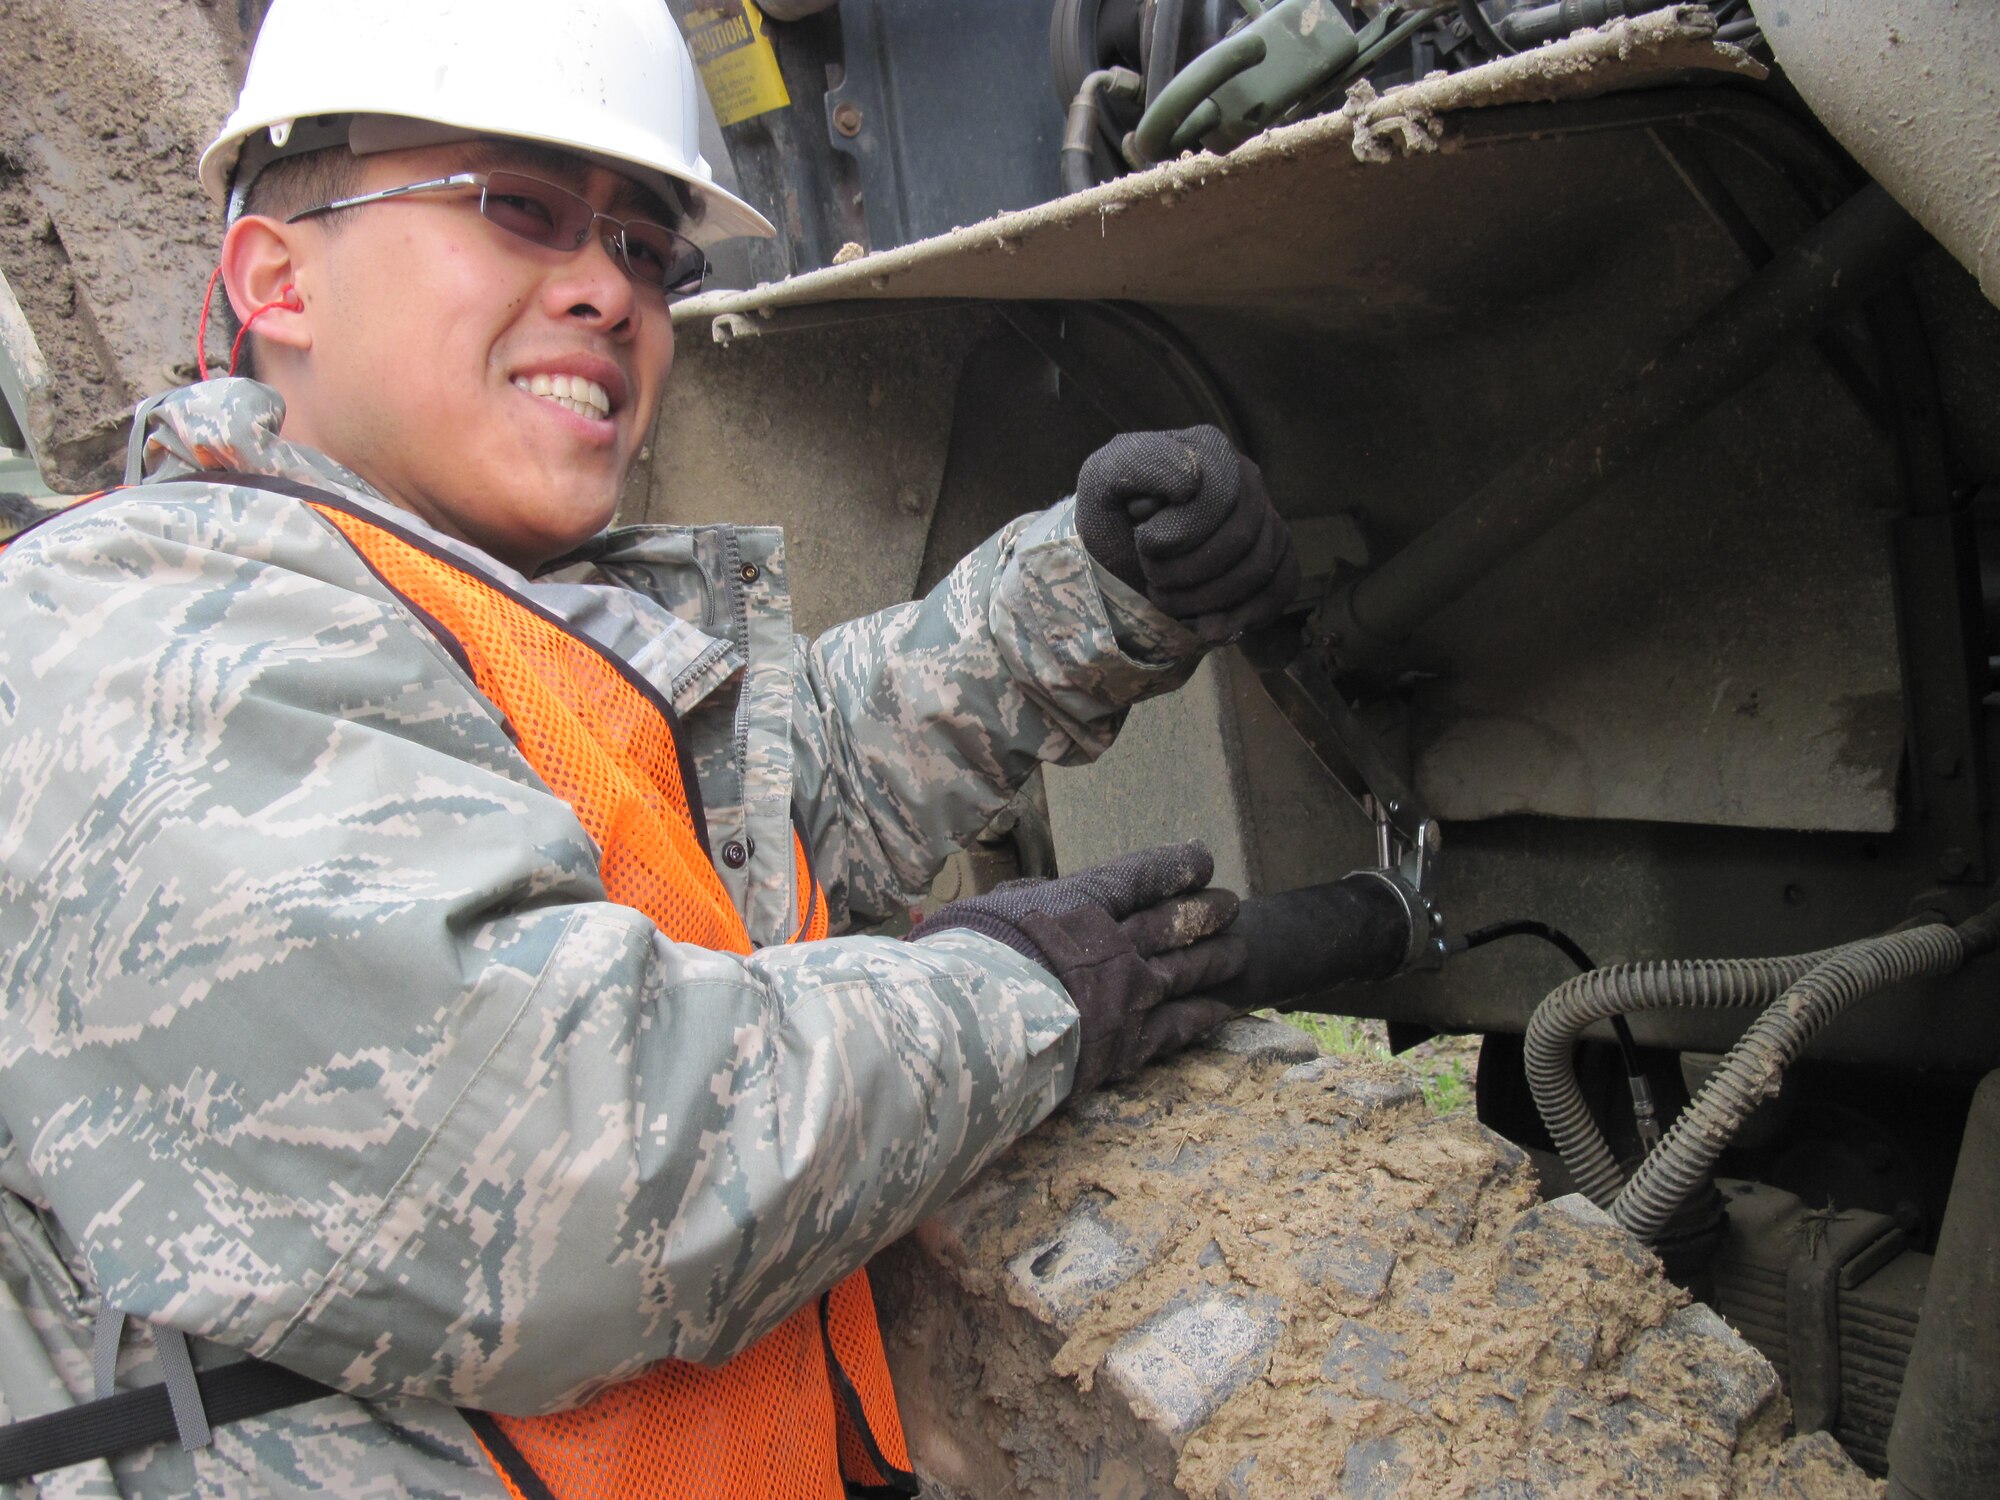 Senior Airman Soo Xiong, a Reservist with the 477th Civil Engineer Squadron,  greases up heavy equipment as preventative maintenance during construction of the Boy Scout Jamboree site. Twenty-two Arctic Reservists from Joint Base Elmendorf-Richardson, Alaska traveled to Beckley, W. Va. to begin work on a 10,600 acre site. (Photo by Master Sgt. Brede Emtman)